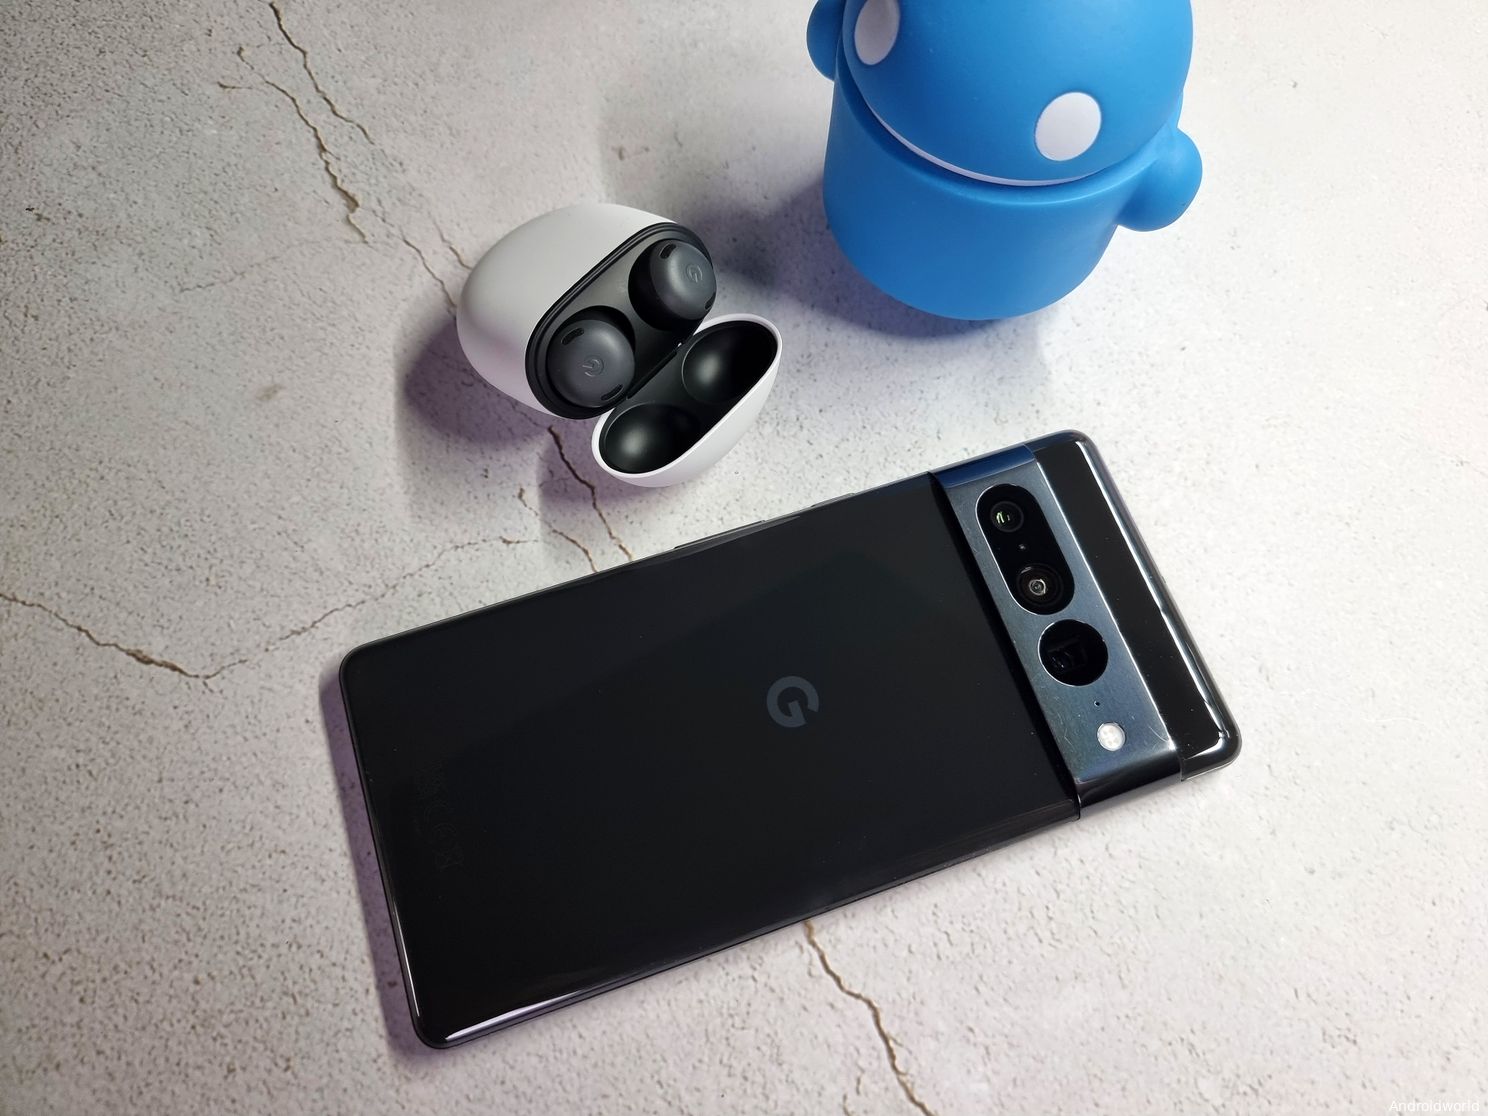 Best smartphone of 2022: Editor's Choice